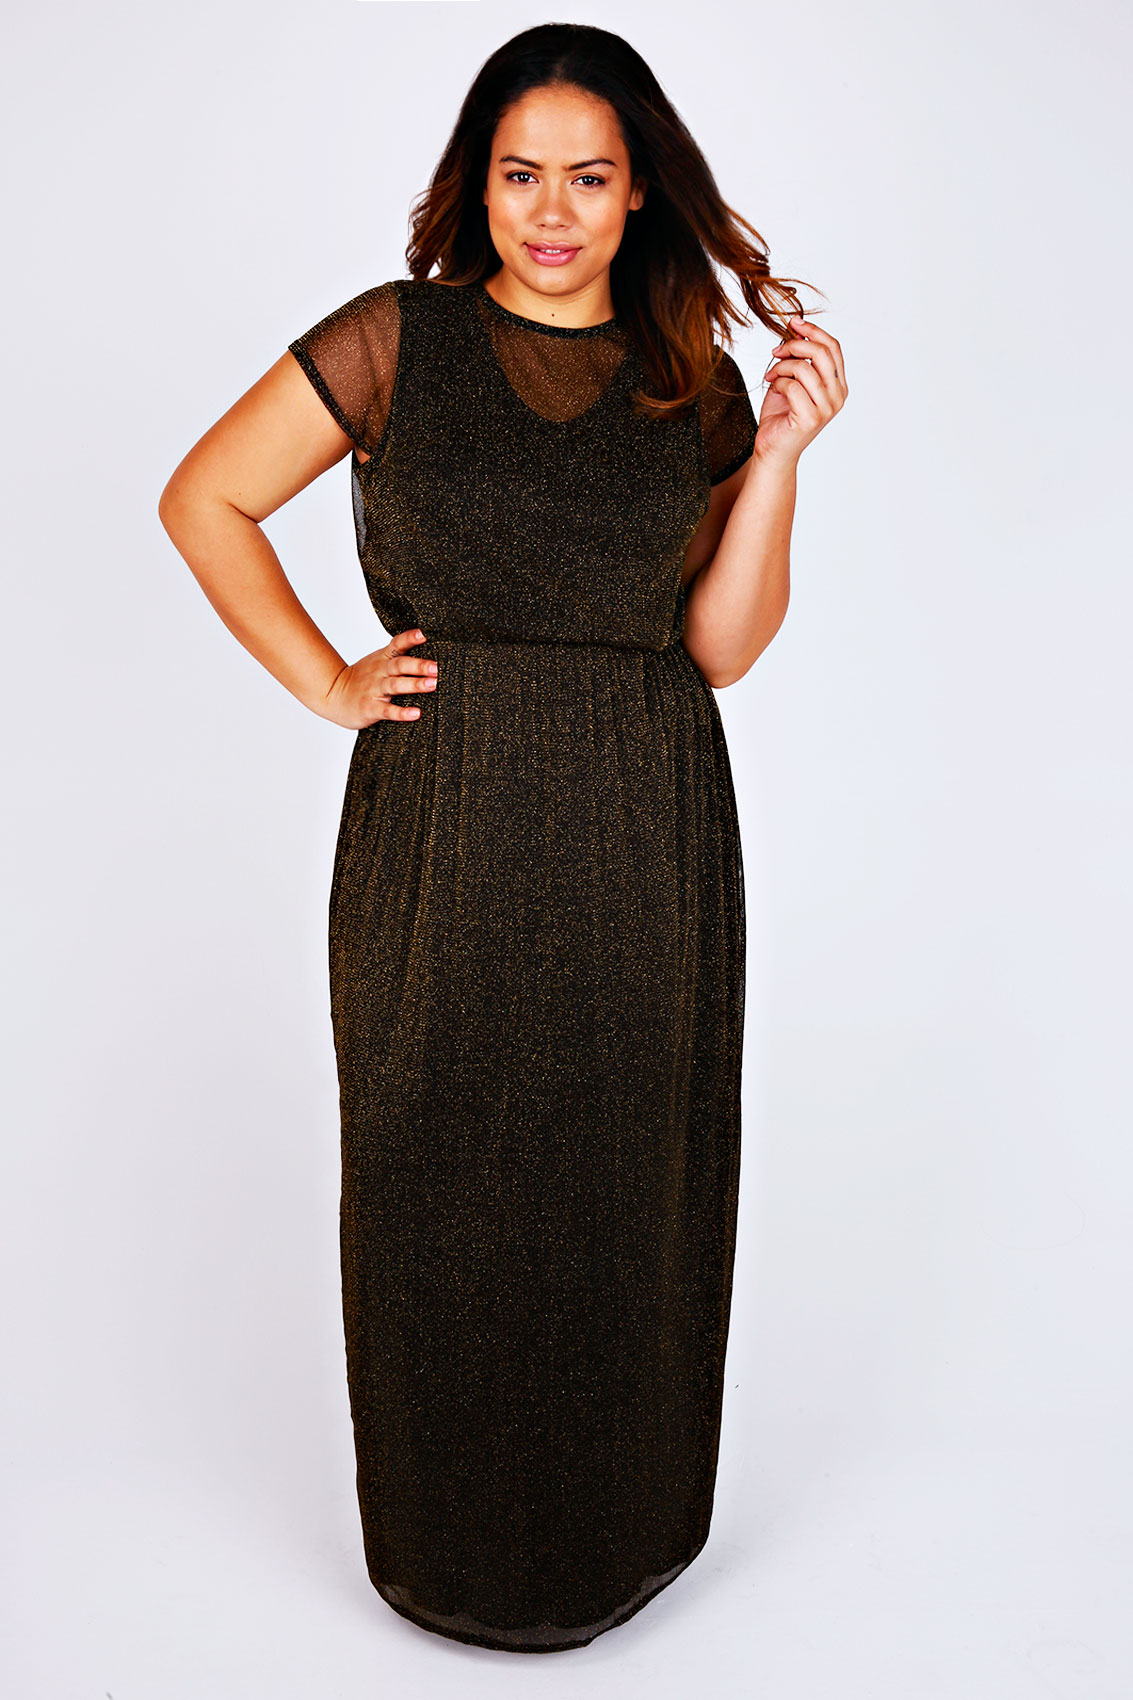 Black & Gold Metallic Thread Maxi Dress With Lace Overlay 